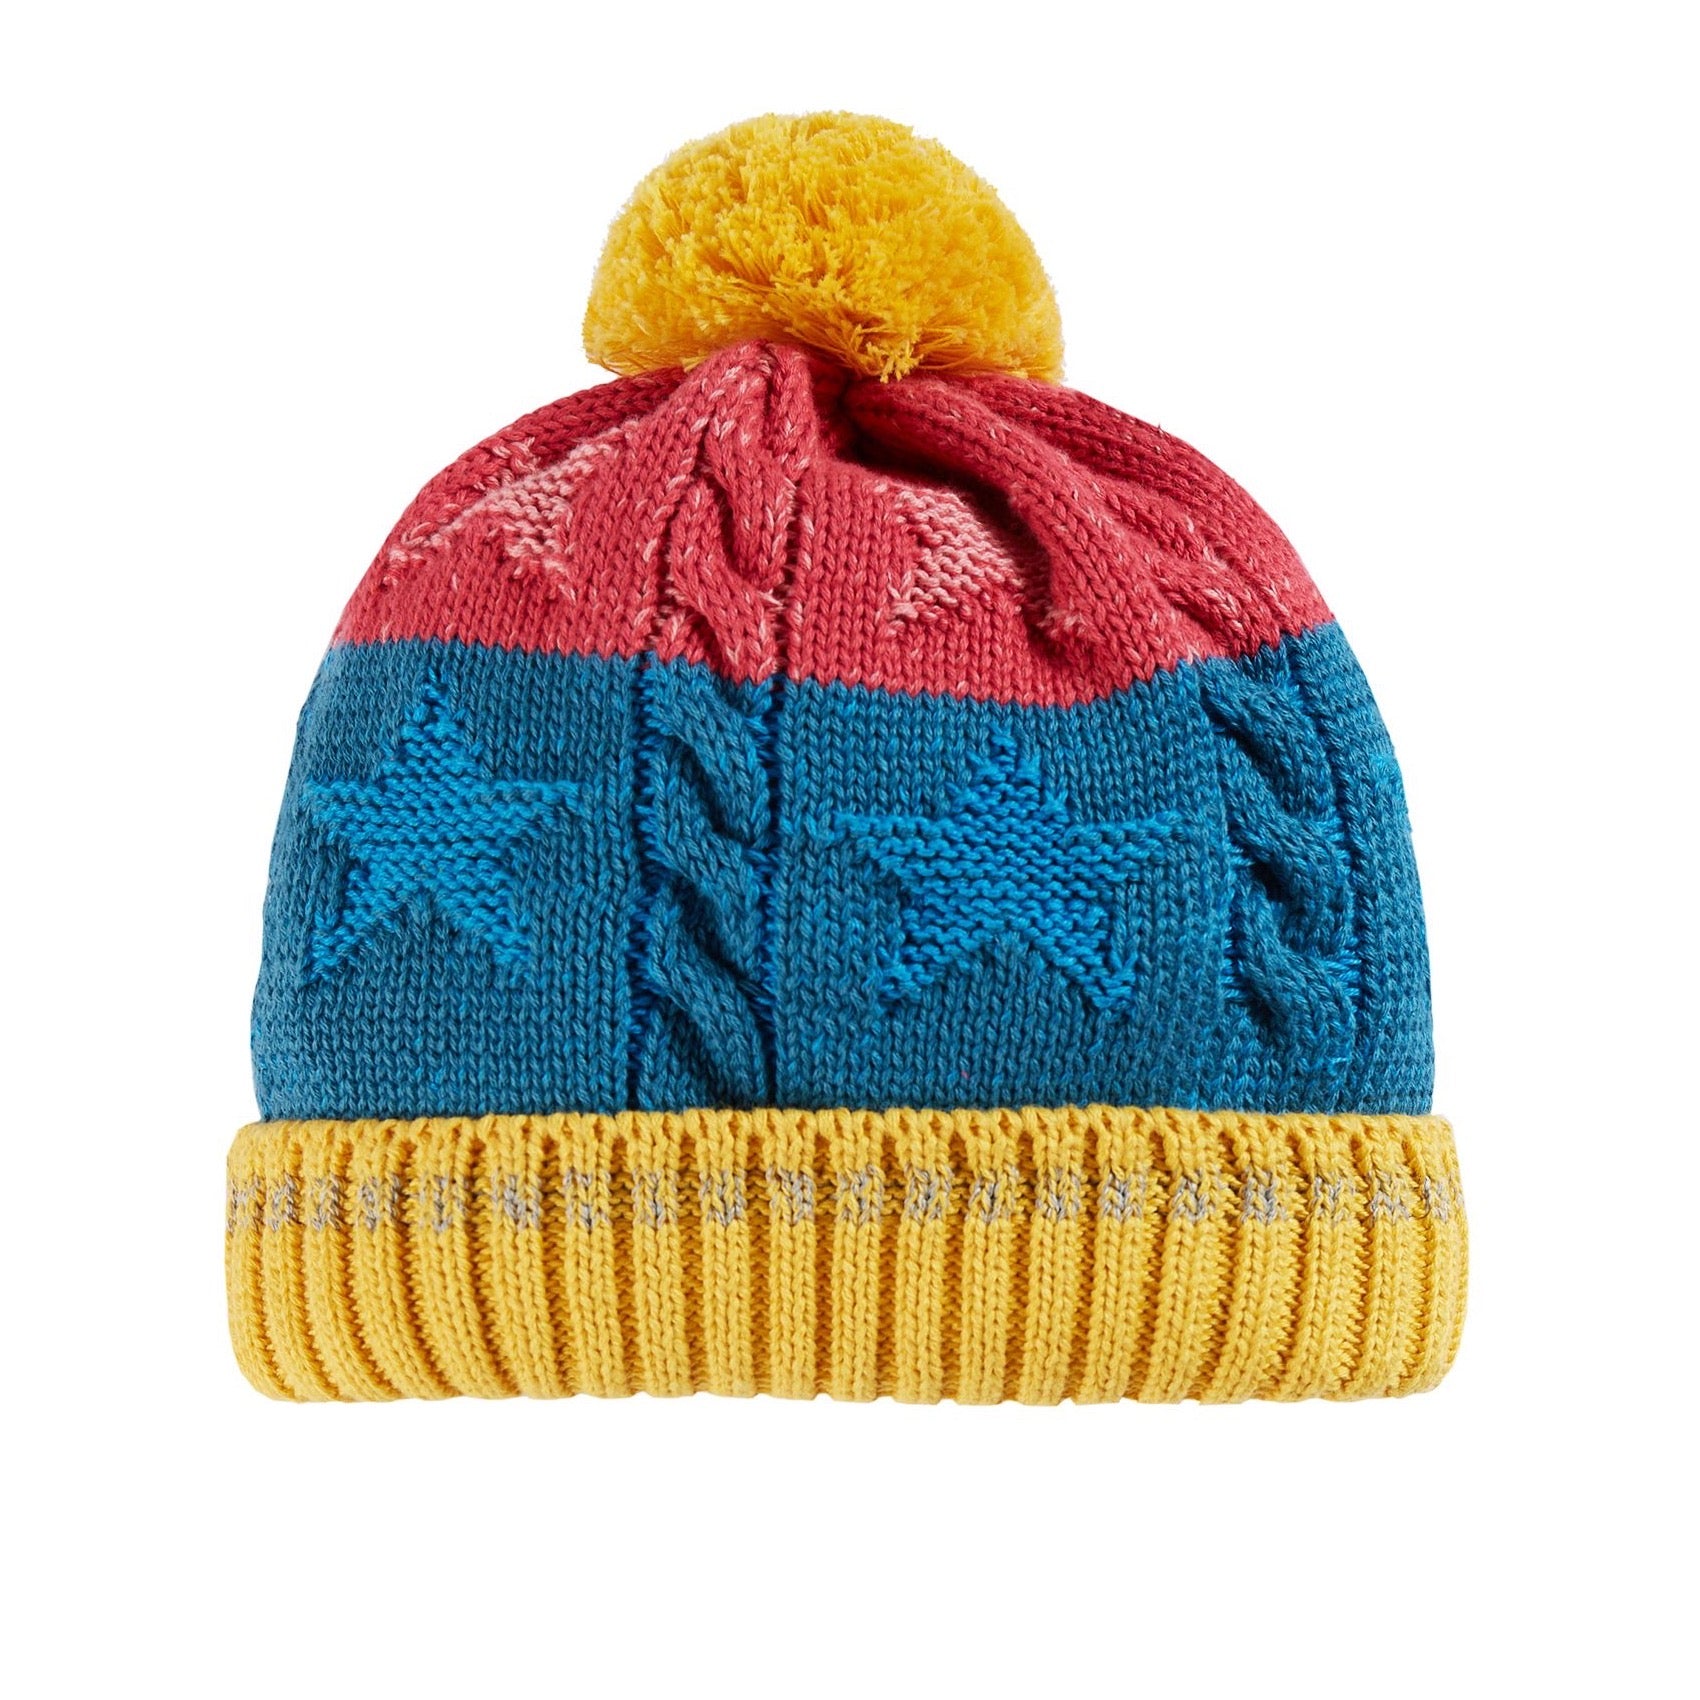 Frugi Cable Knit Bobble Hat Blue Guava Star Clothing 2-6YRS / Multi,6-10YRS / Multi